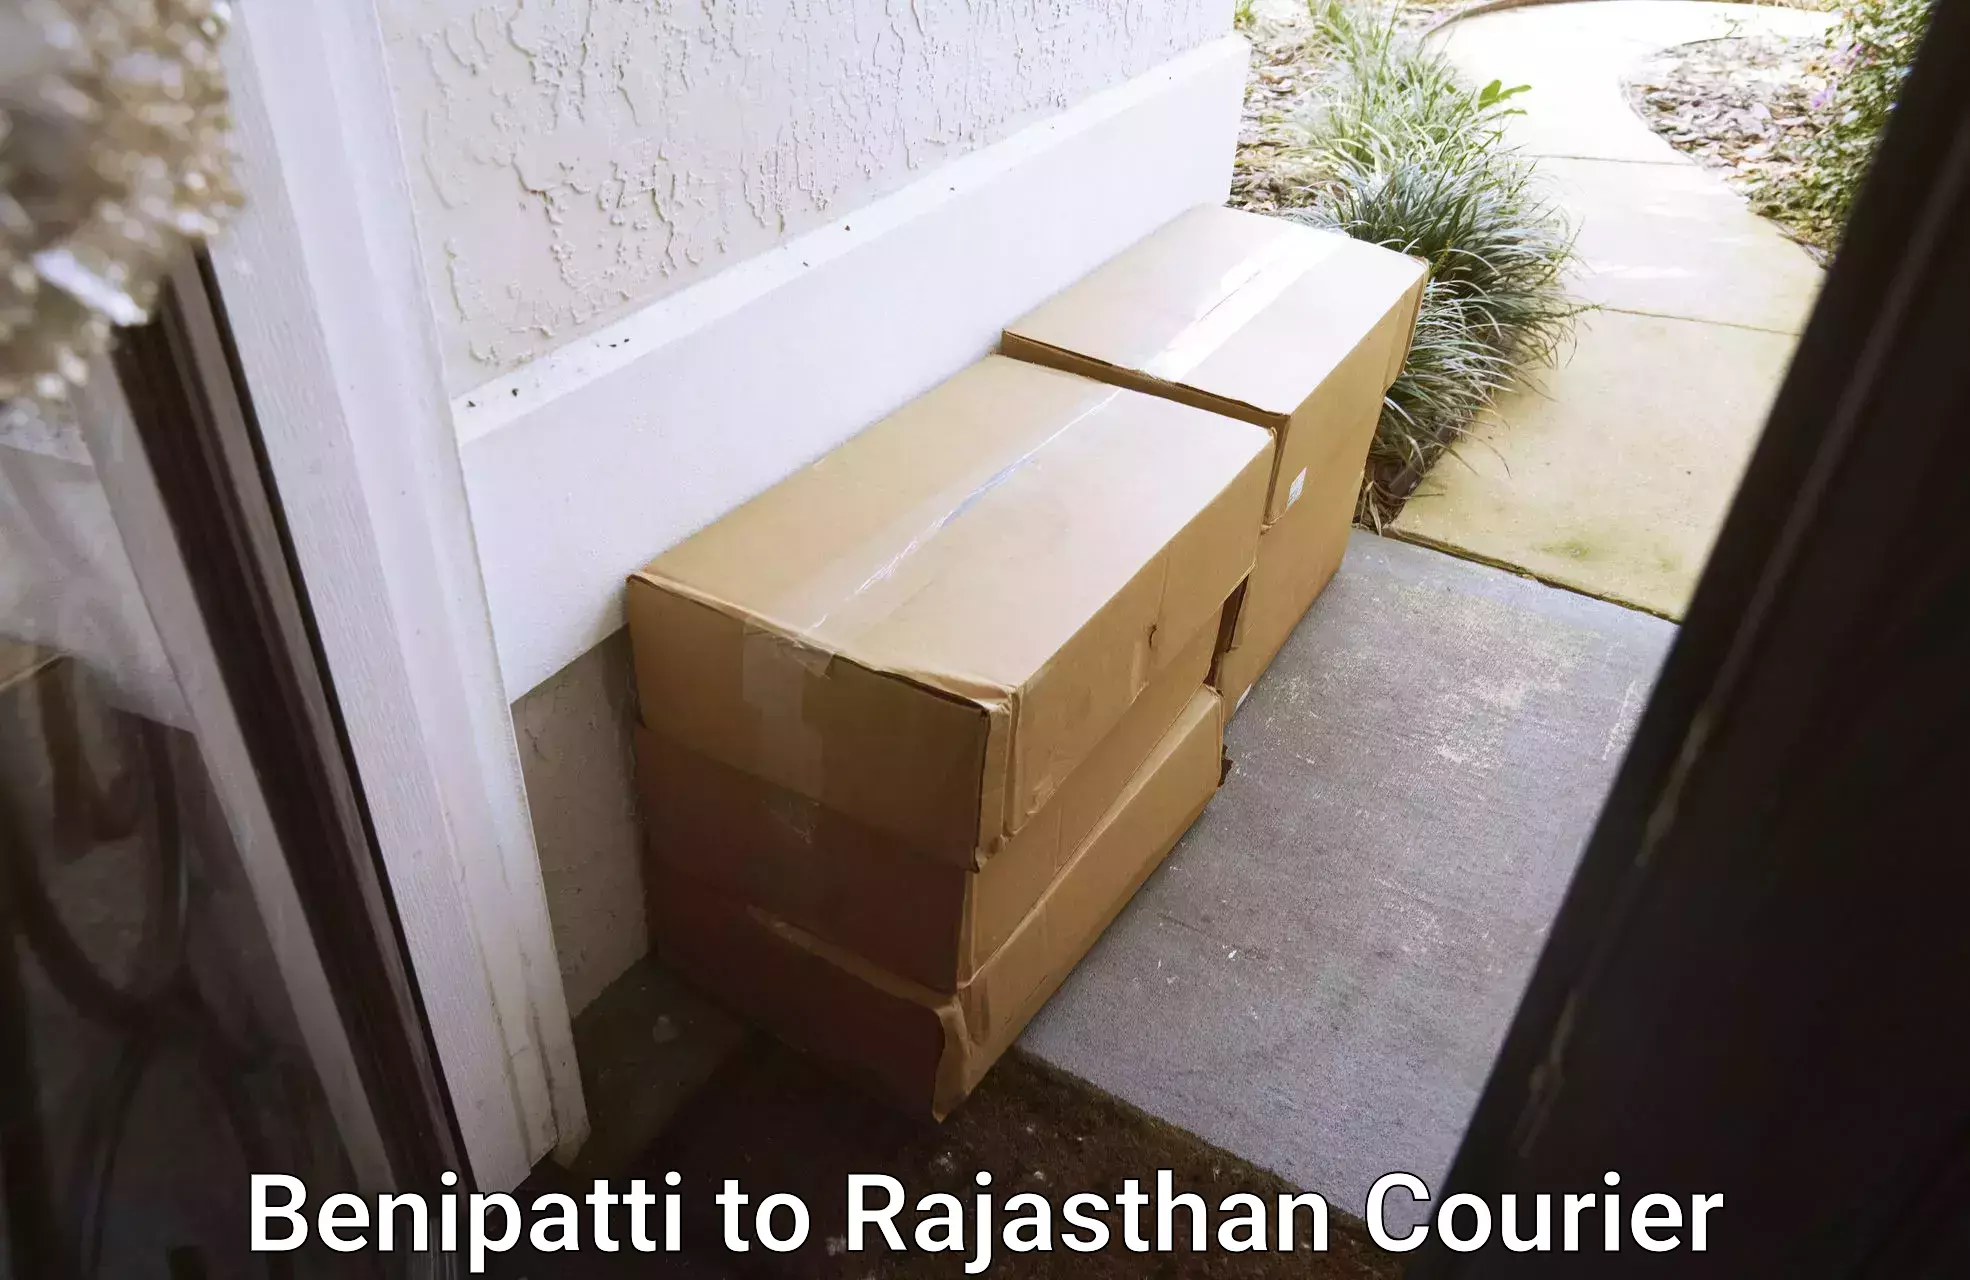 Quality relocation services Benipatti to Rajasthan